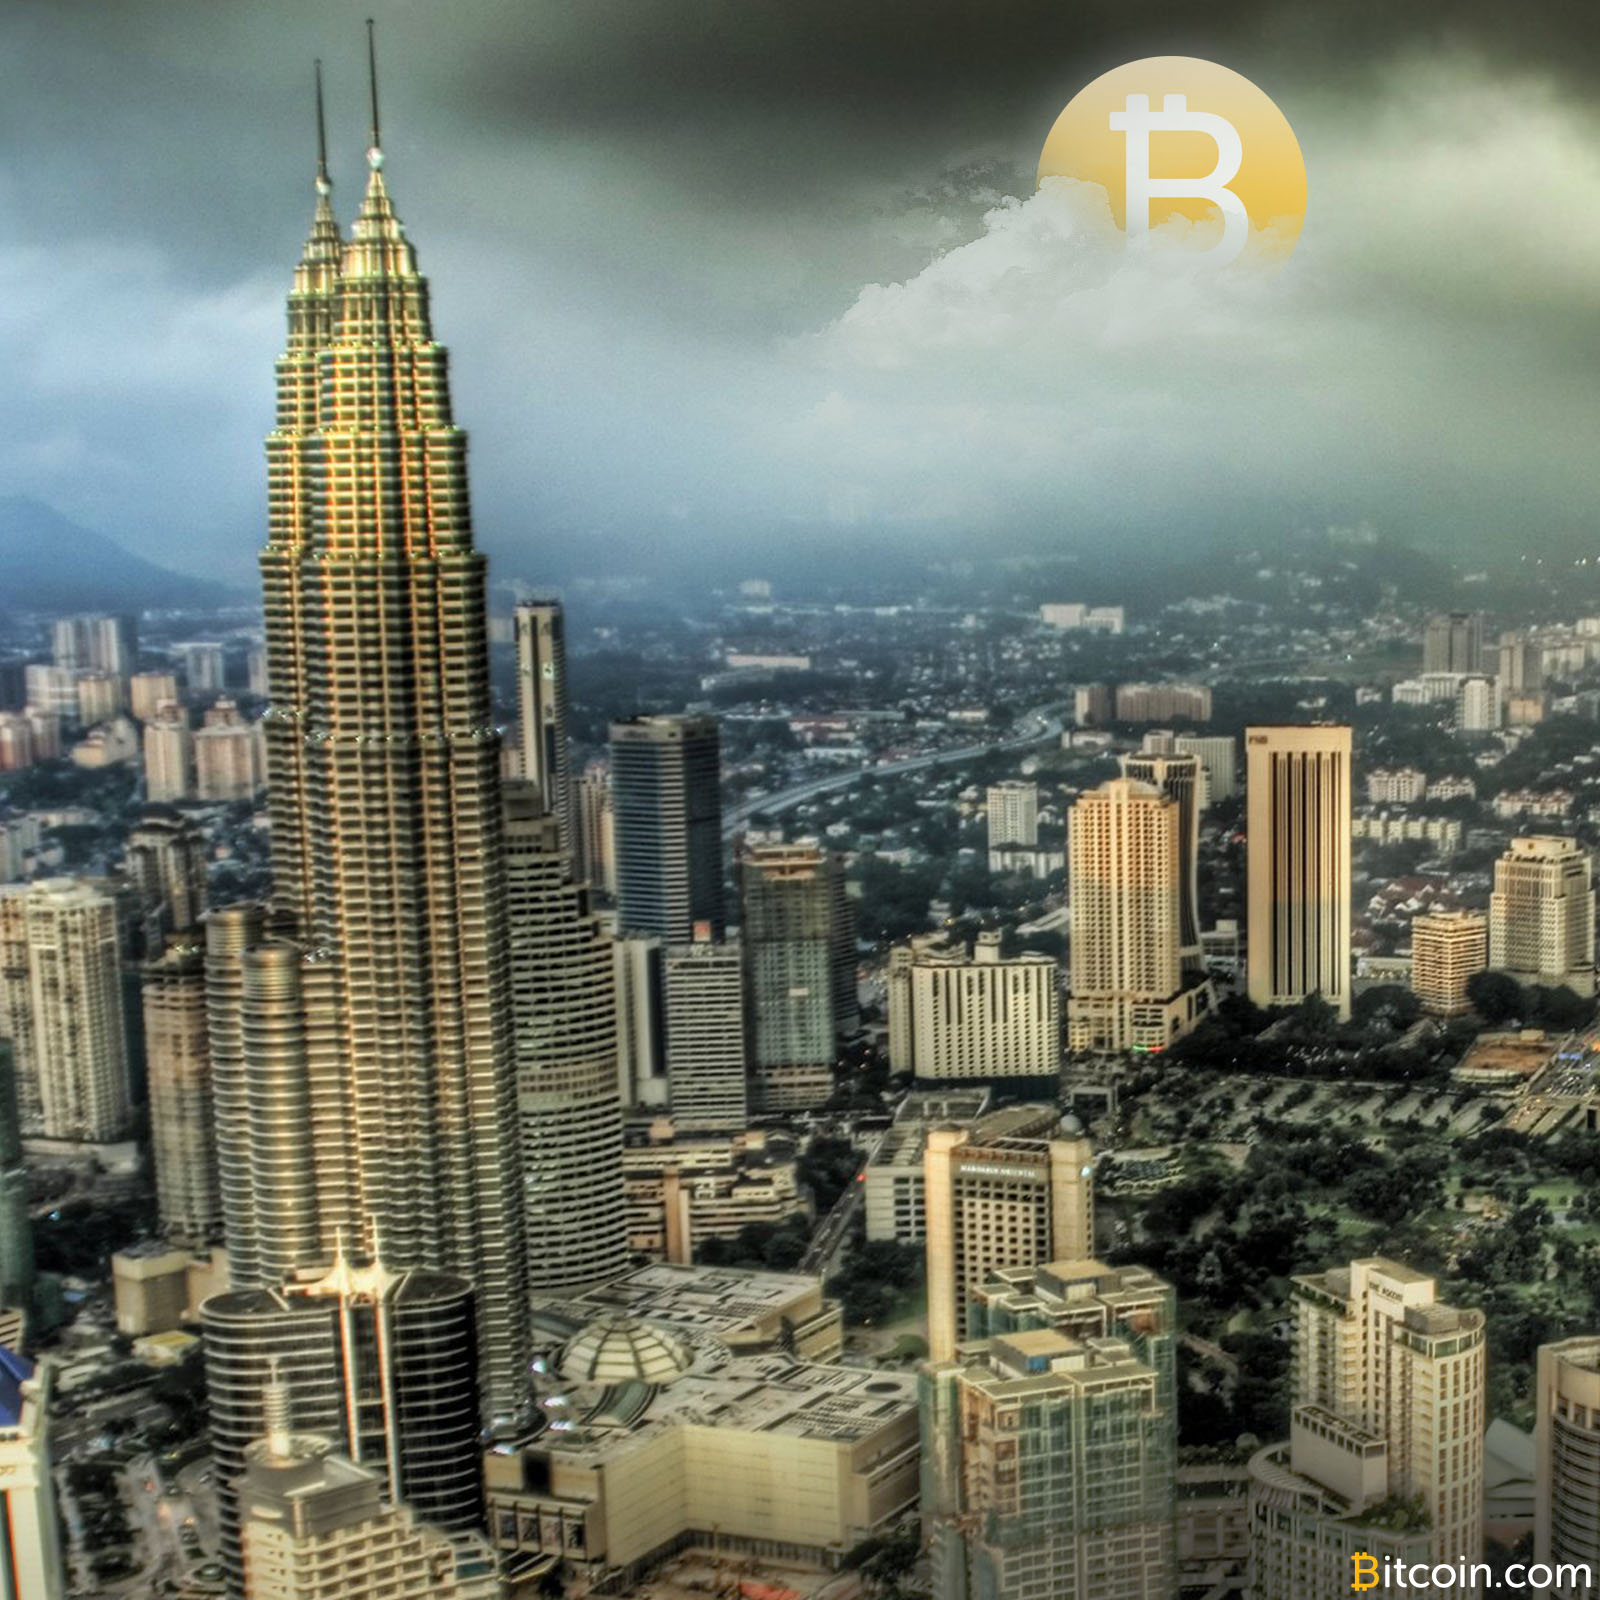 Malaysia's Central Bank to Decide on Crypto Regulation at Year's End